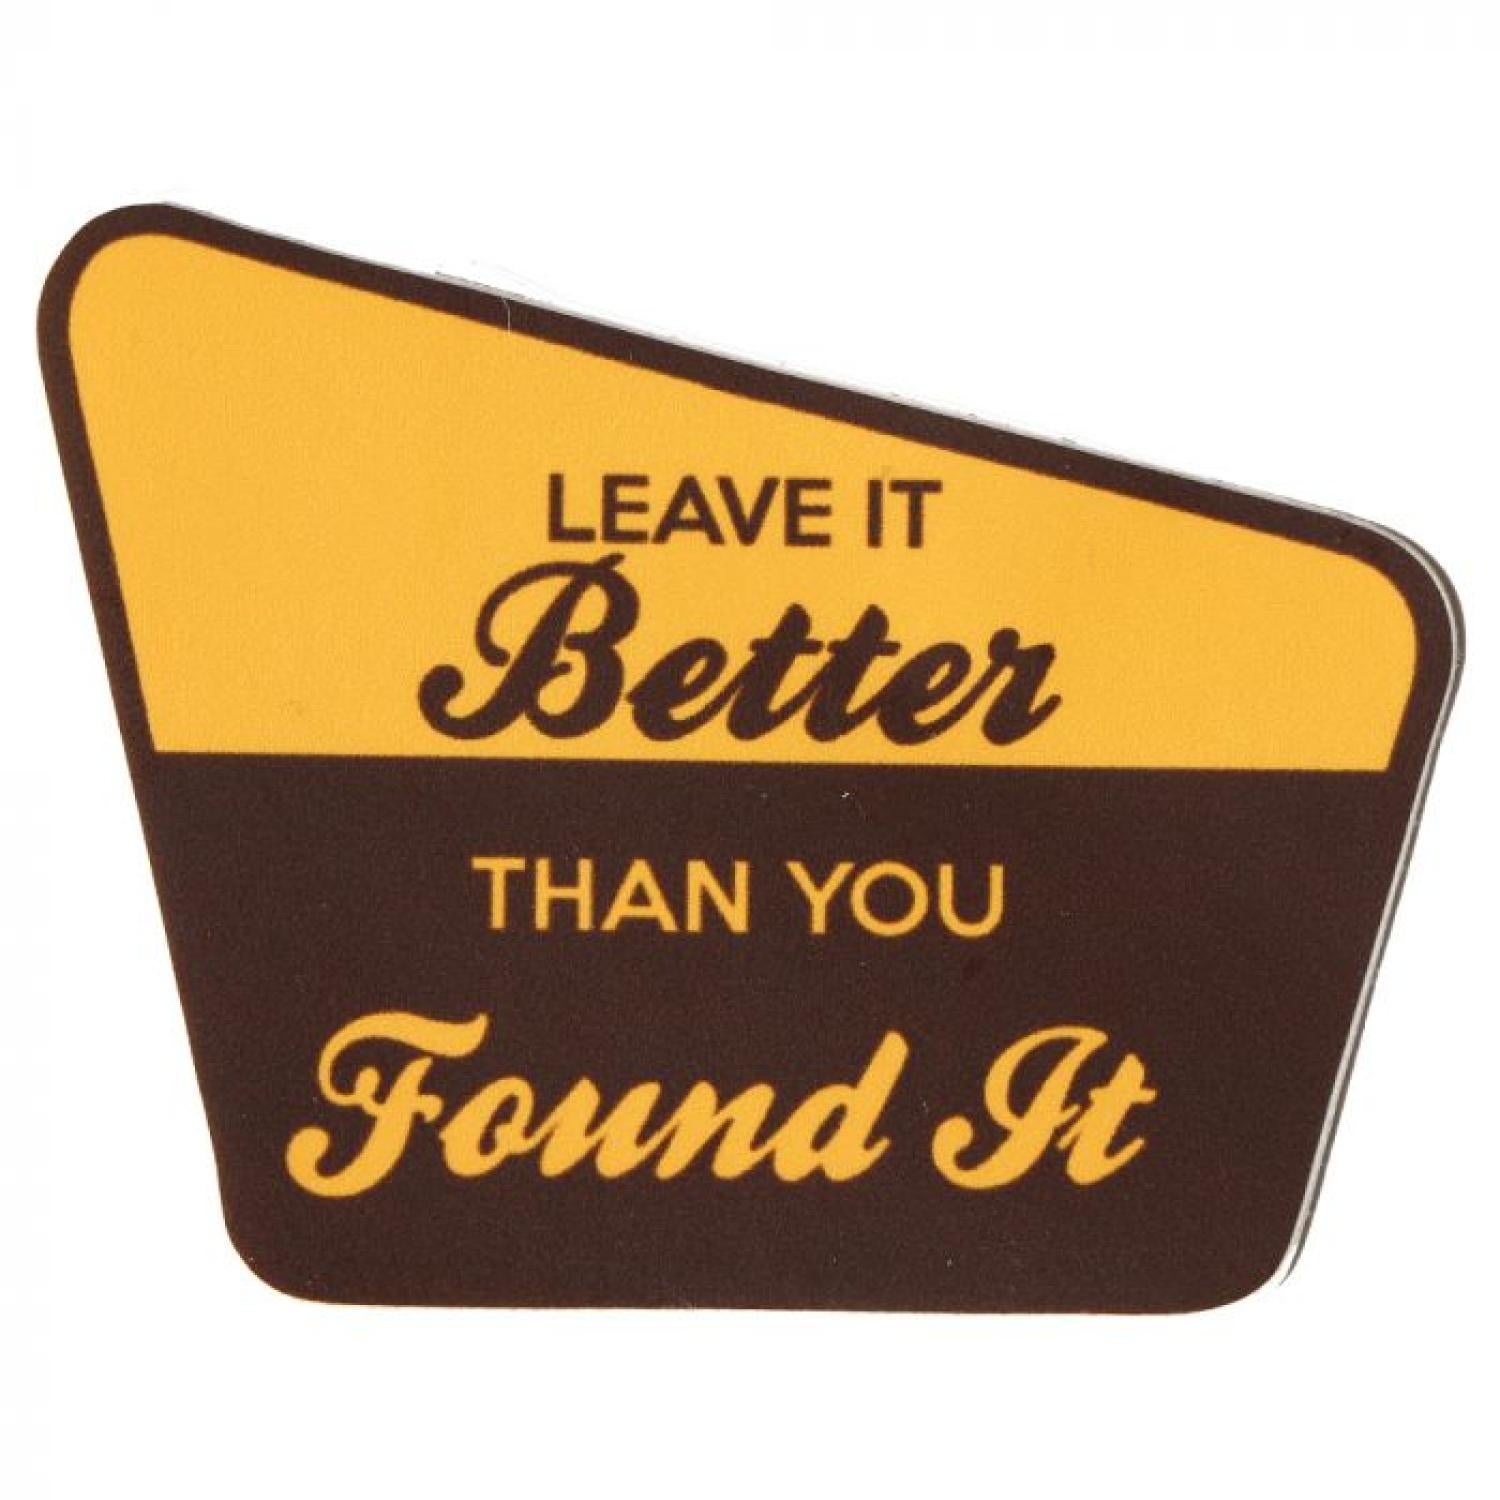 Leave it better than you found it sticker